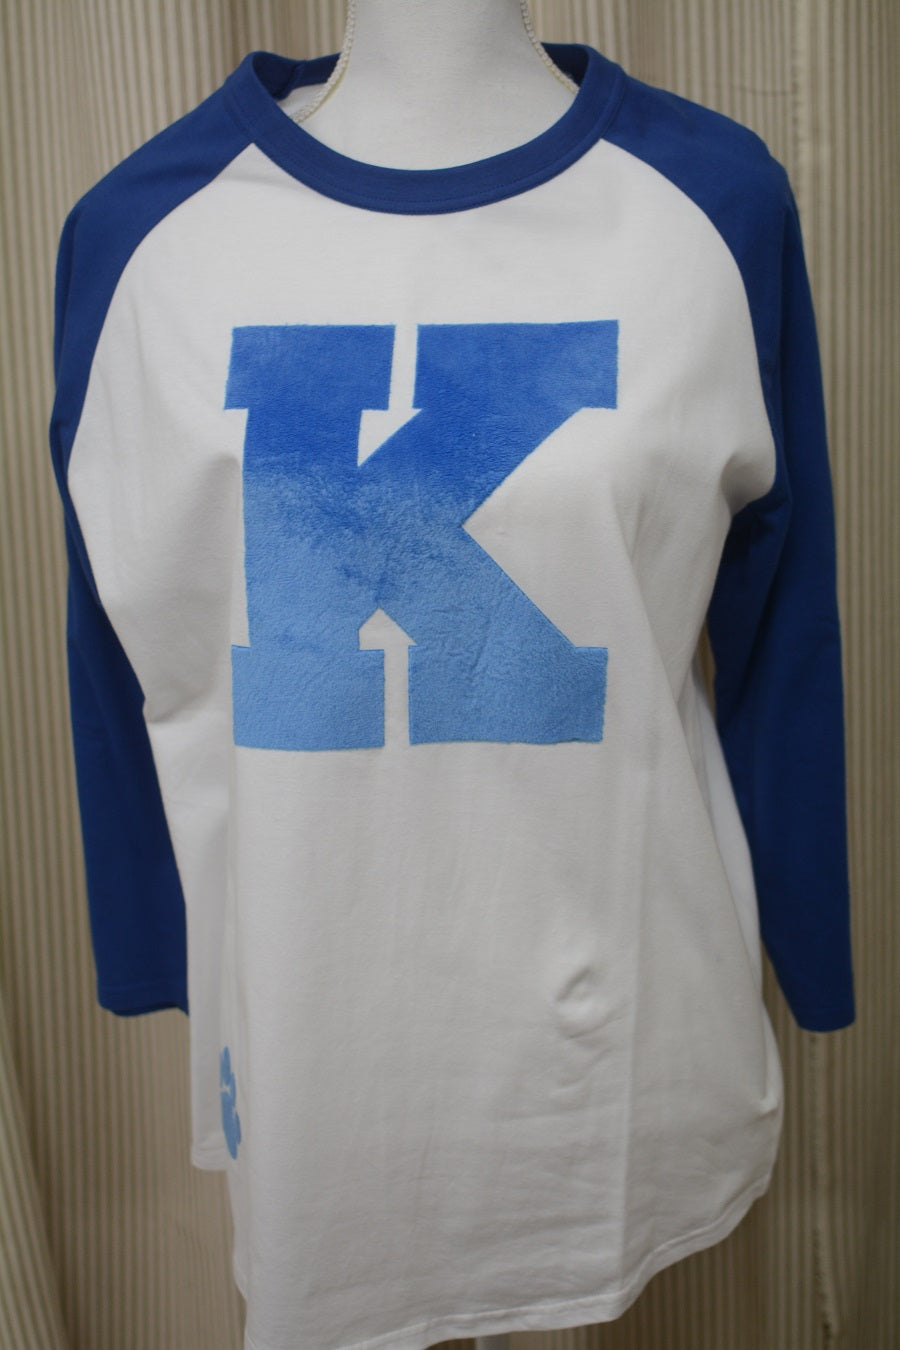 KENTUCKY INSPIRED T-SHIRTS AND GIFTS Full Chest K Ky Baseball Tee